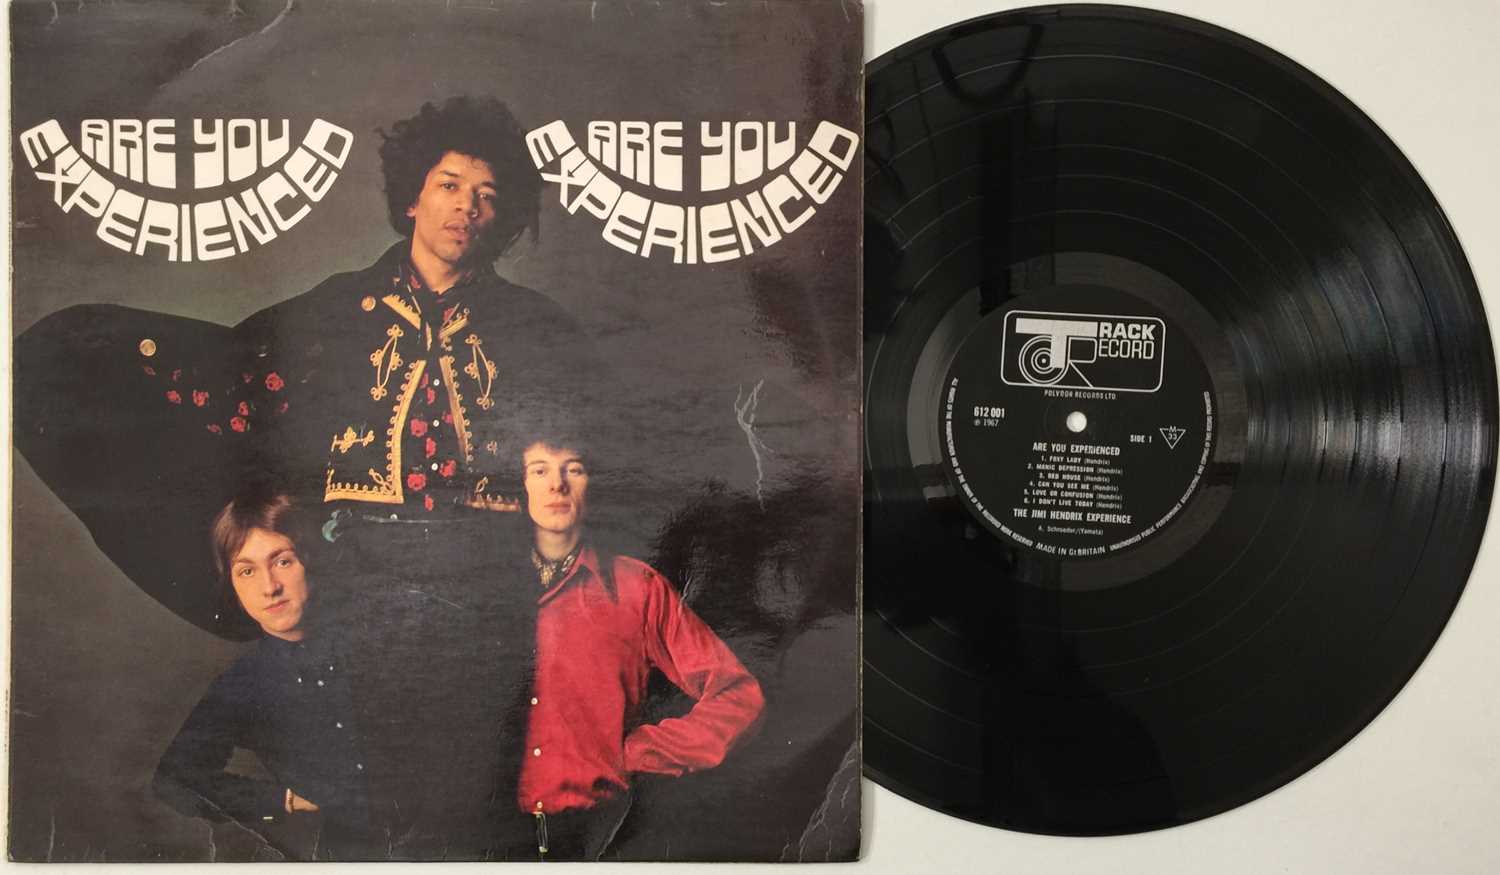 Lot 104 - THE JIMI HENDRIX EXPERIENCE - ARE YOU EXPERIENCED (TRACK RECORD - 612 001)